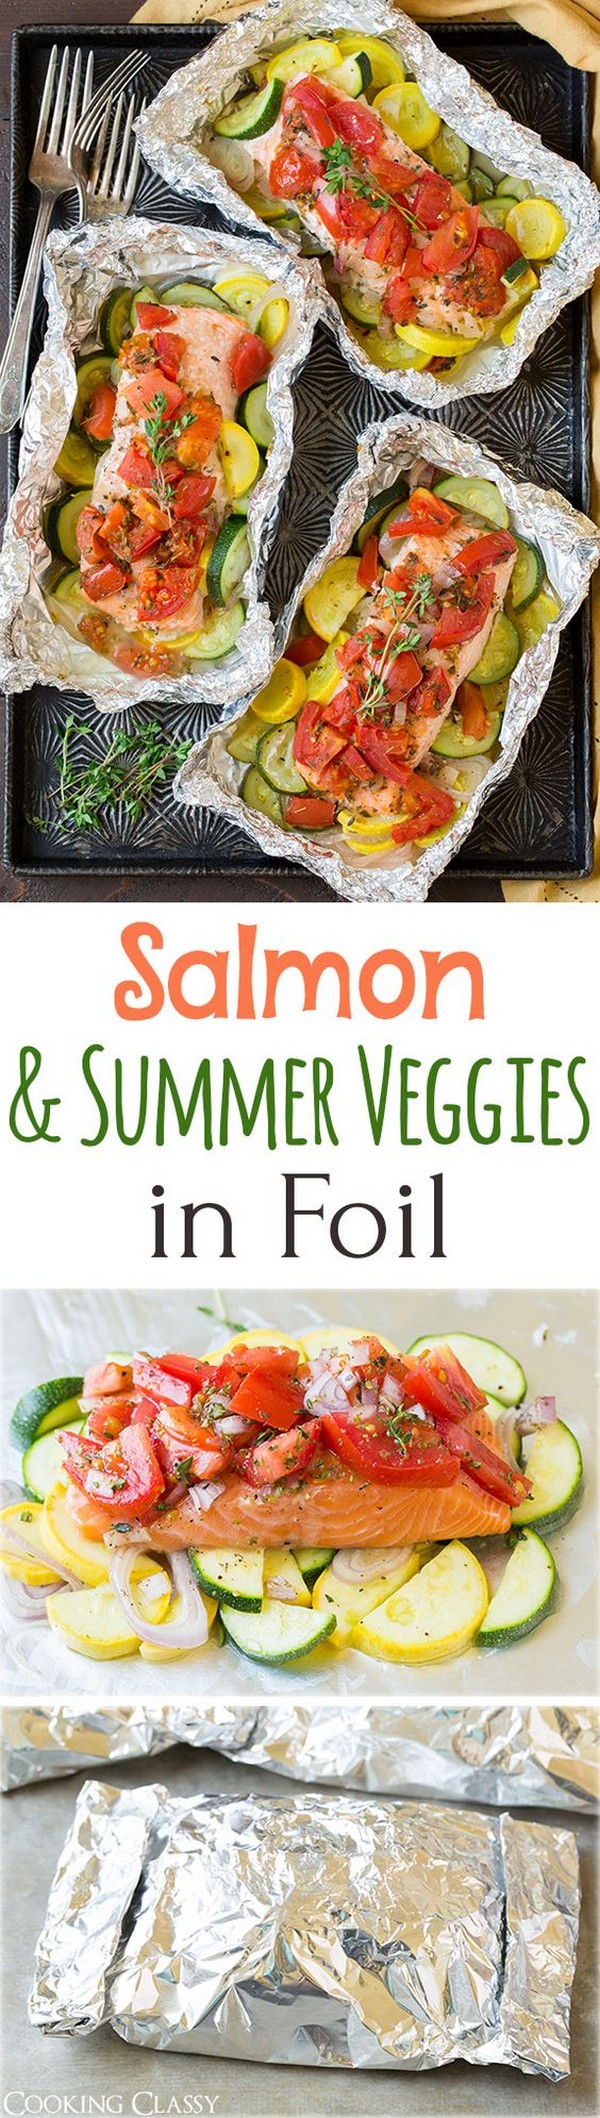 Salmon And Summer Veggies In Foil